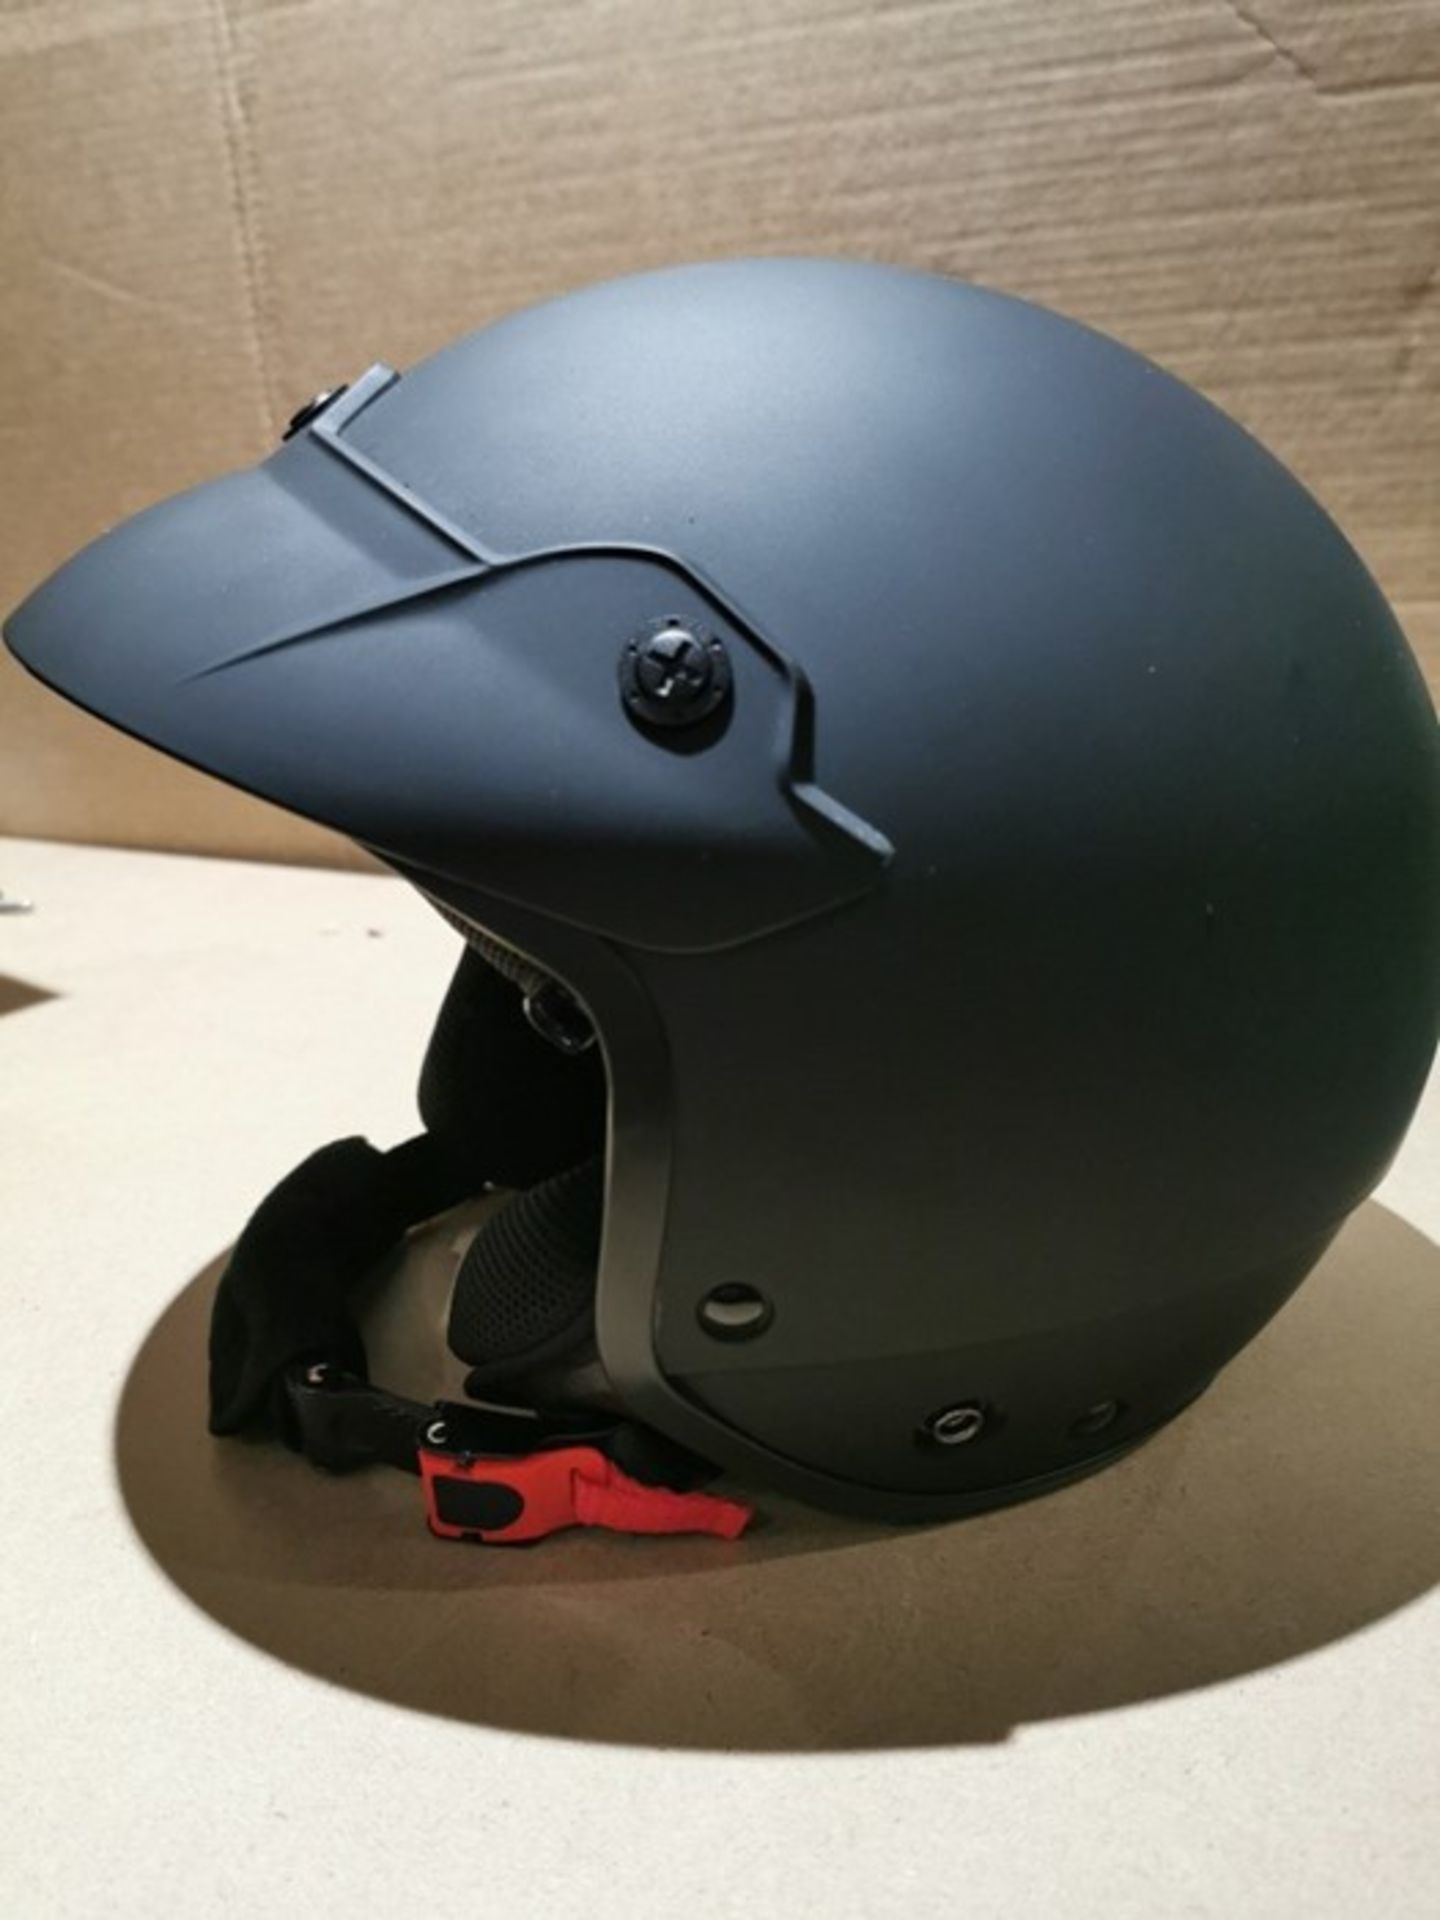 Protectwear Jet helmet H740 with integrated sun - Image 3 of 3